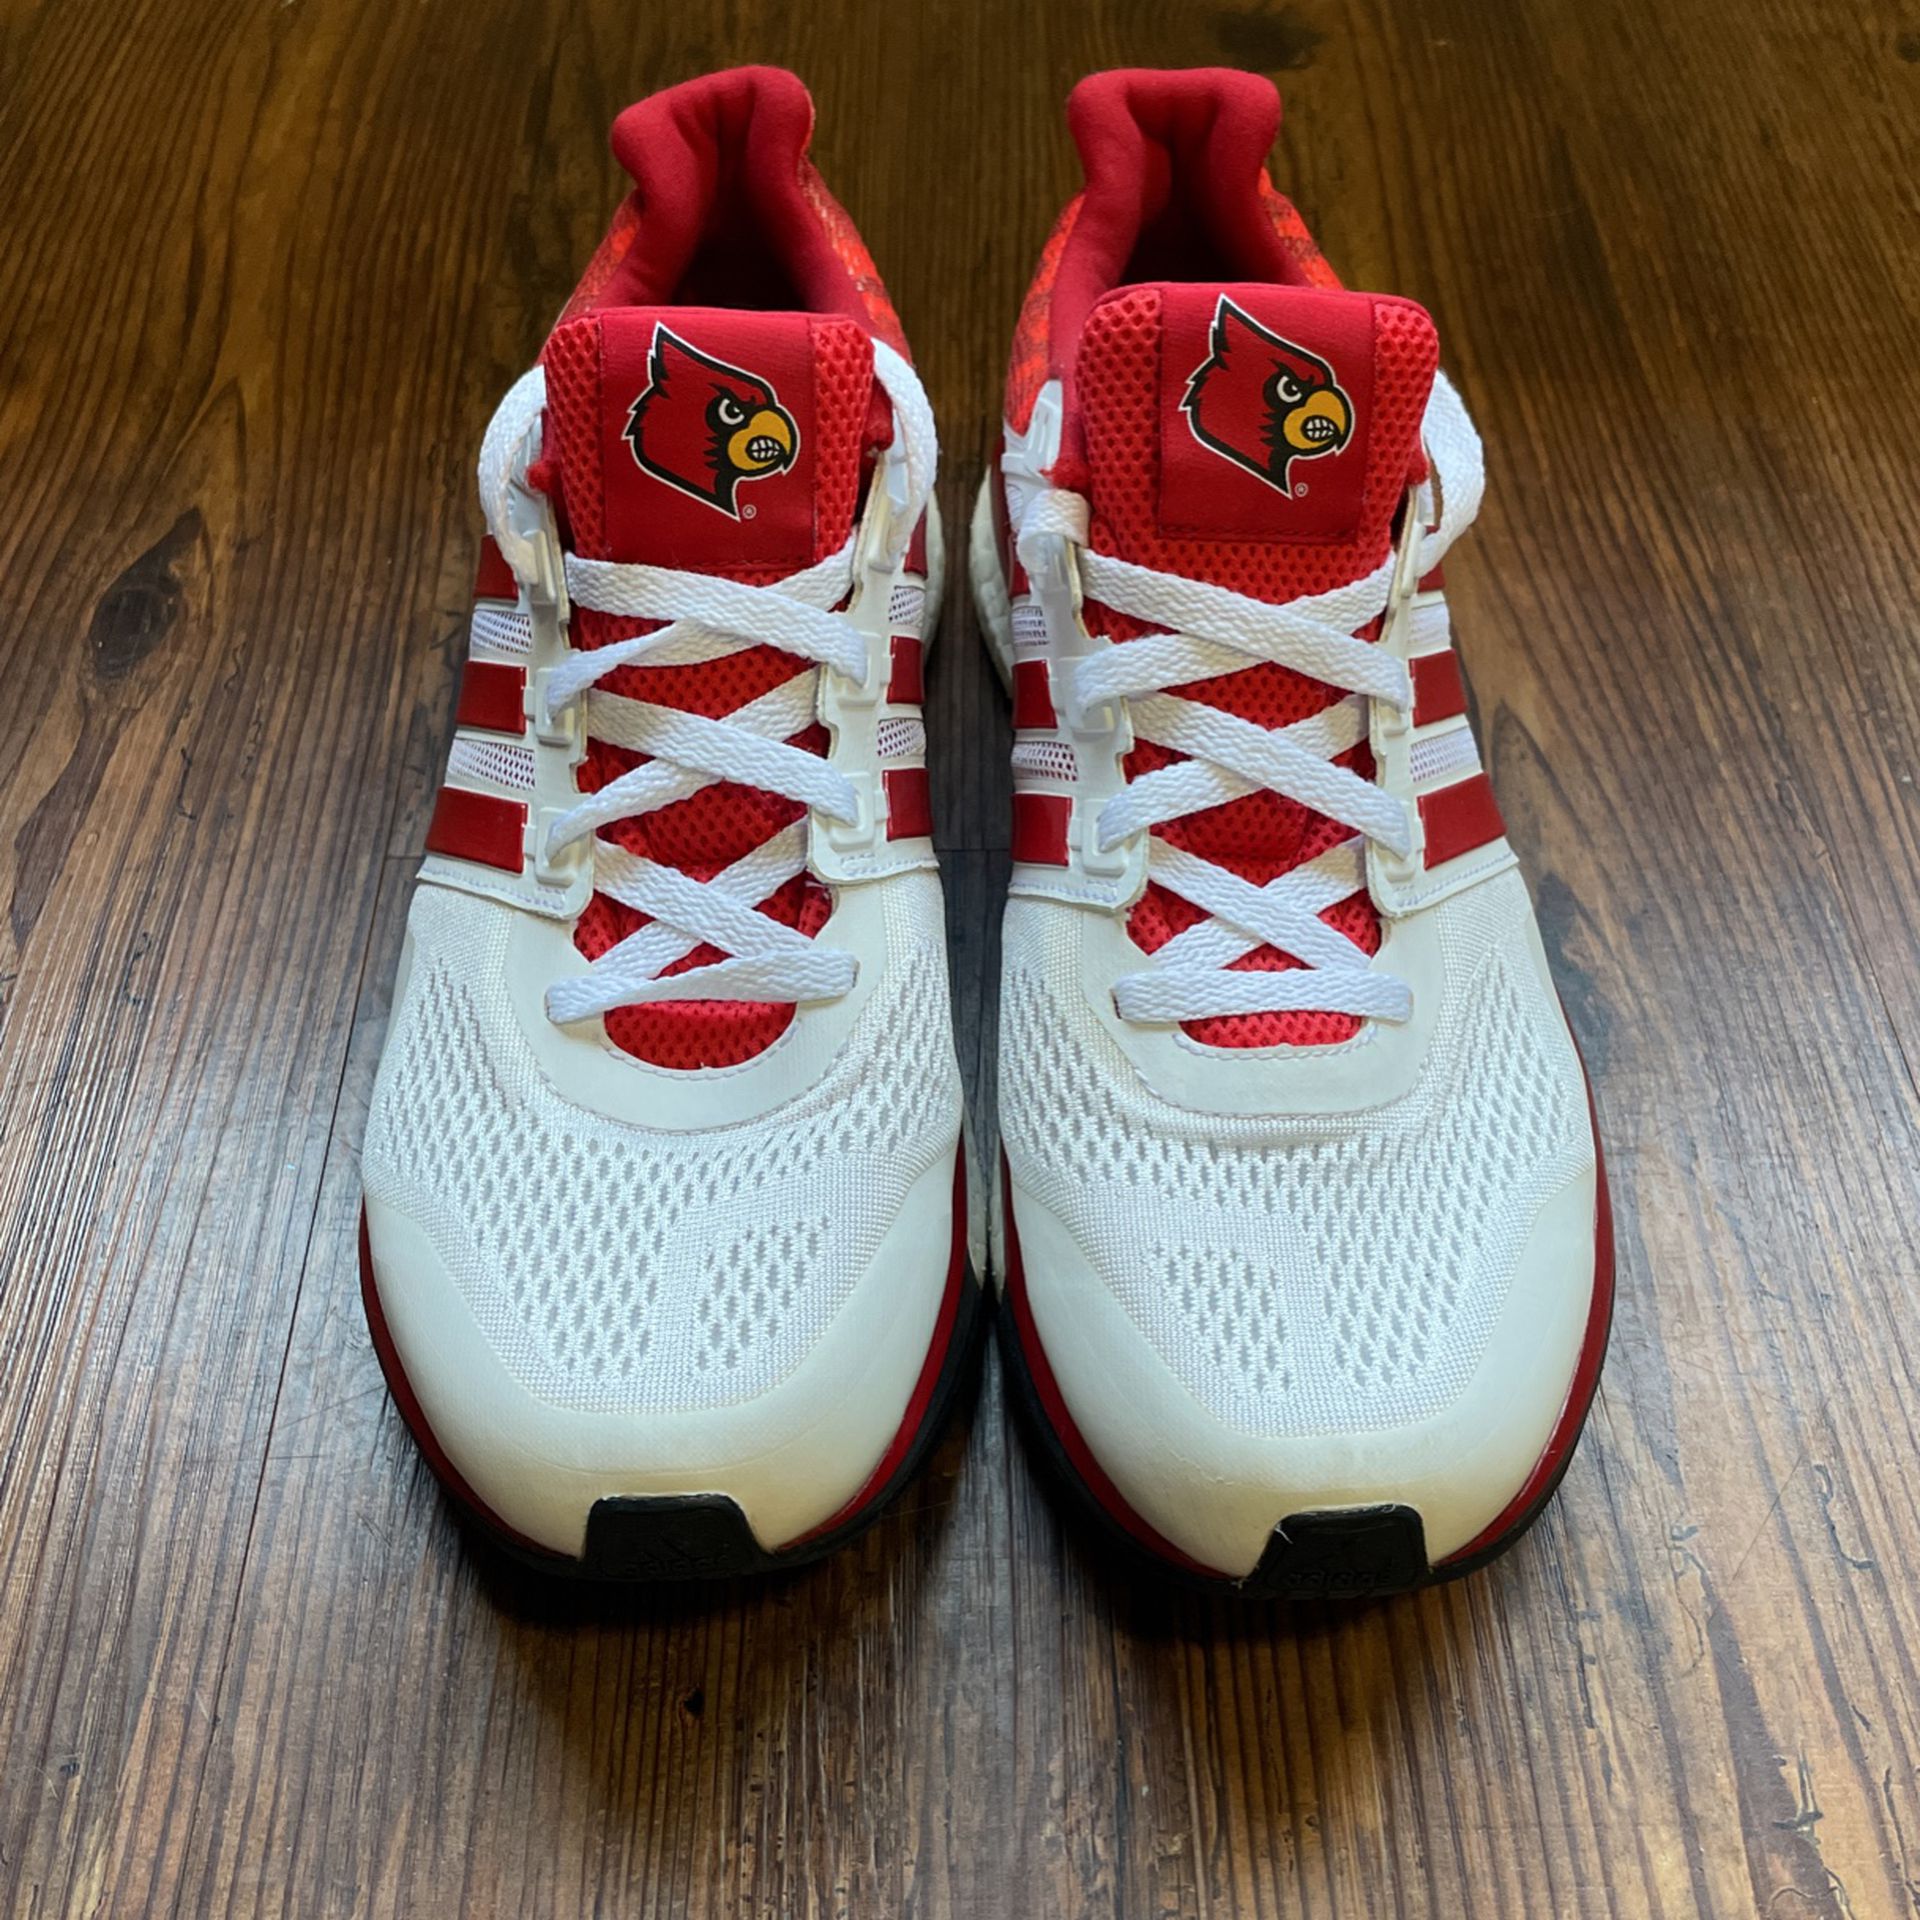 Adidas Louisville Shoes Size 12